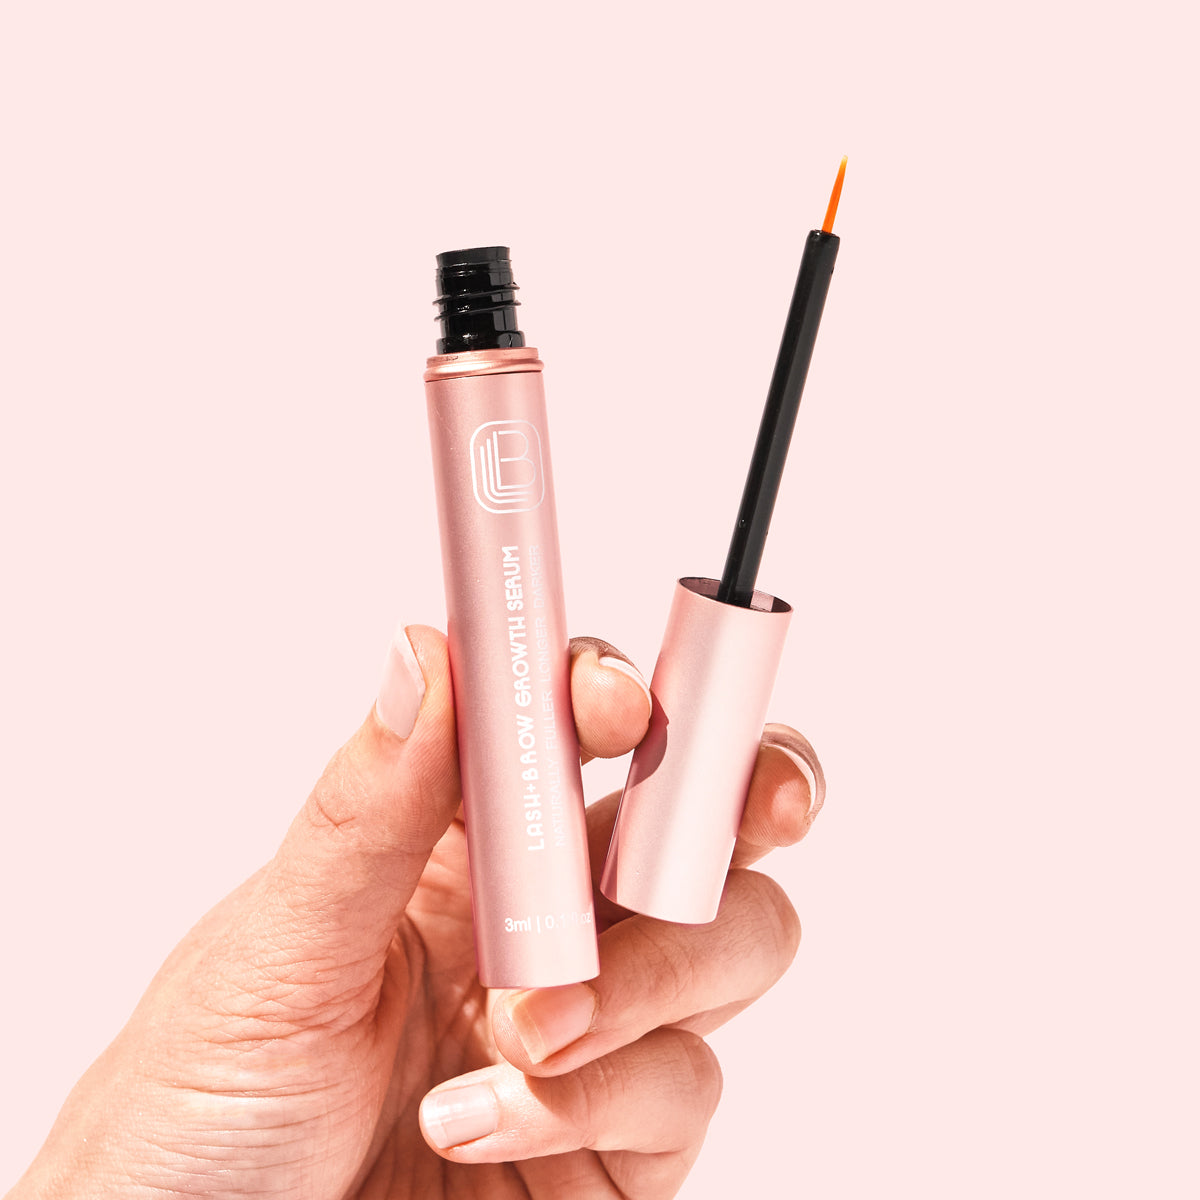 The best lash and brow growth serum in Australia